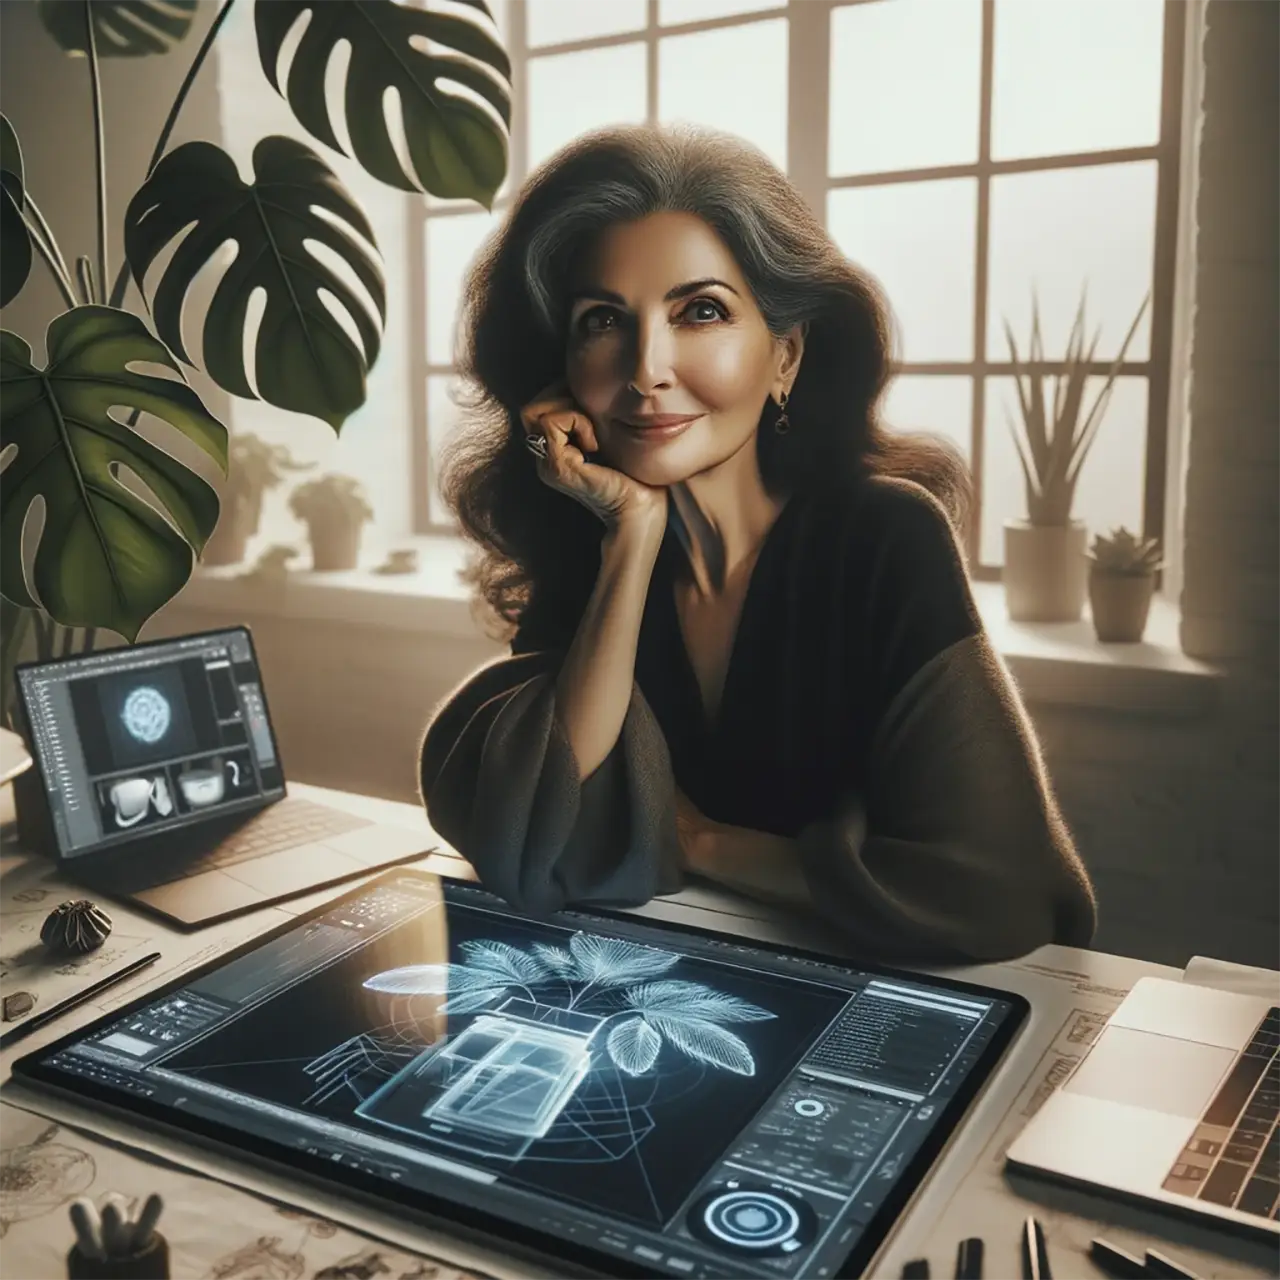 The picture shows a designer at her workstation, looking confidently at the viewer. In front of her is a wireless graphics tablet that digitally displays a design. This was created using artificial intelligence tools. The laptops on the right and left of the desk refer to this.